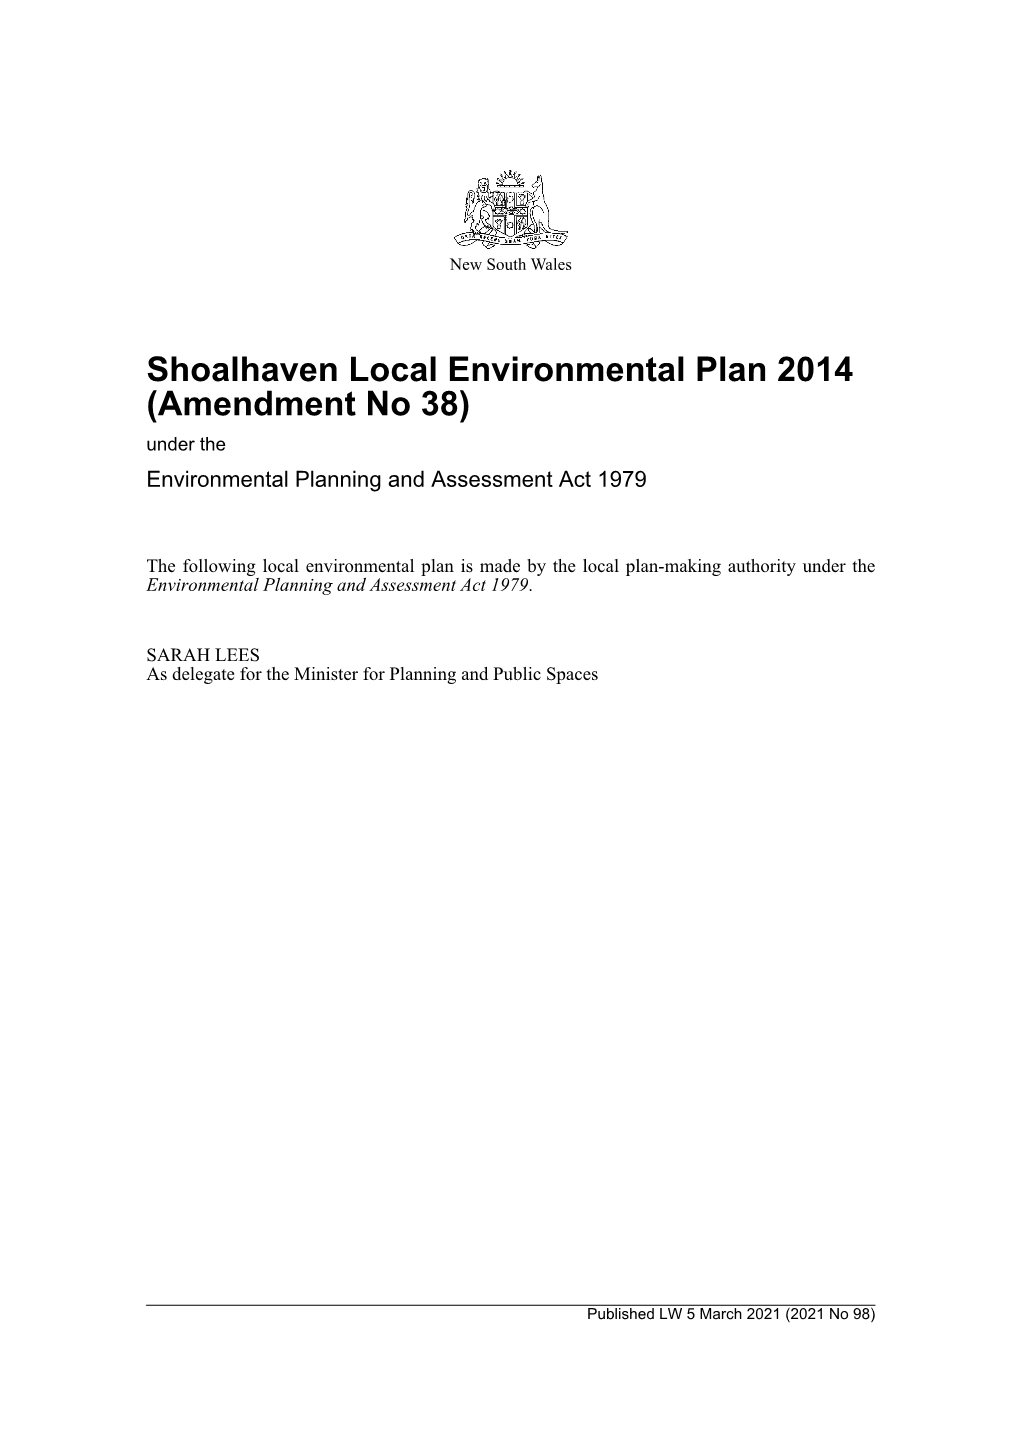 Shoalhaven Local Environmental Plan 2014 (Amendment No 38) Under the Environmental Planning and Assessment Act 1979